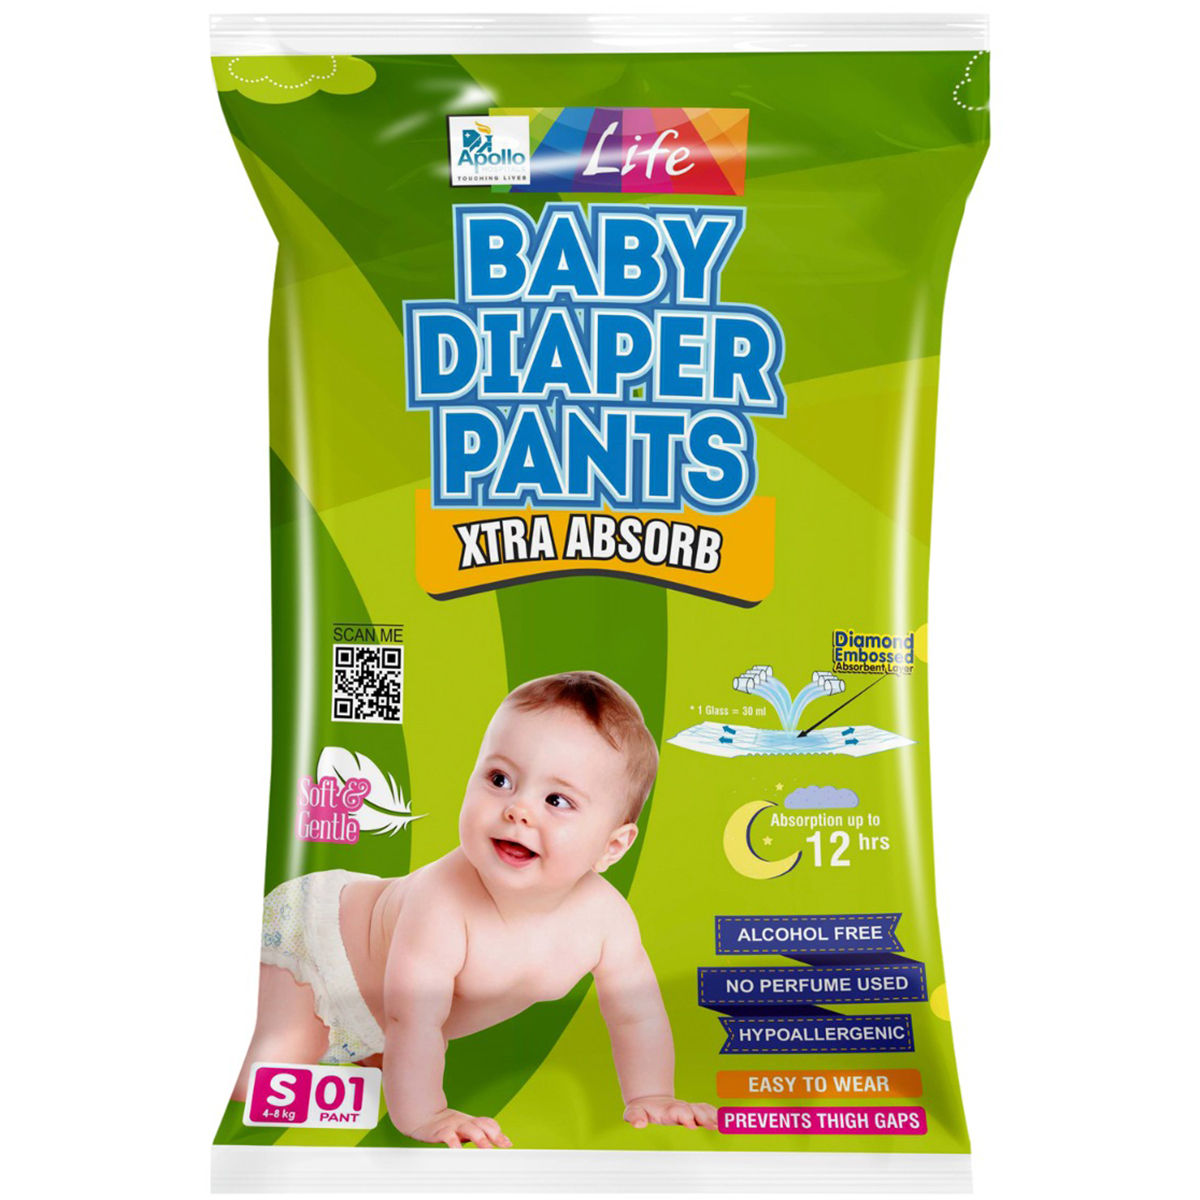 Buy Supples Premium Diapers Medium M 72 Count 712 Kg 12 hrs  Absorption Baby Diaper Pants Online at Low Prices in India  Amazonin